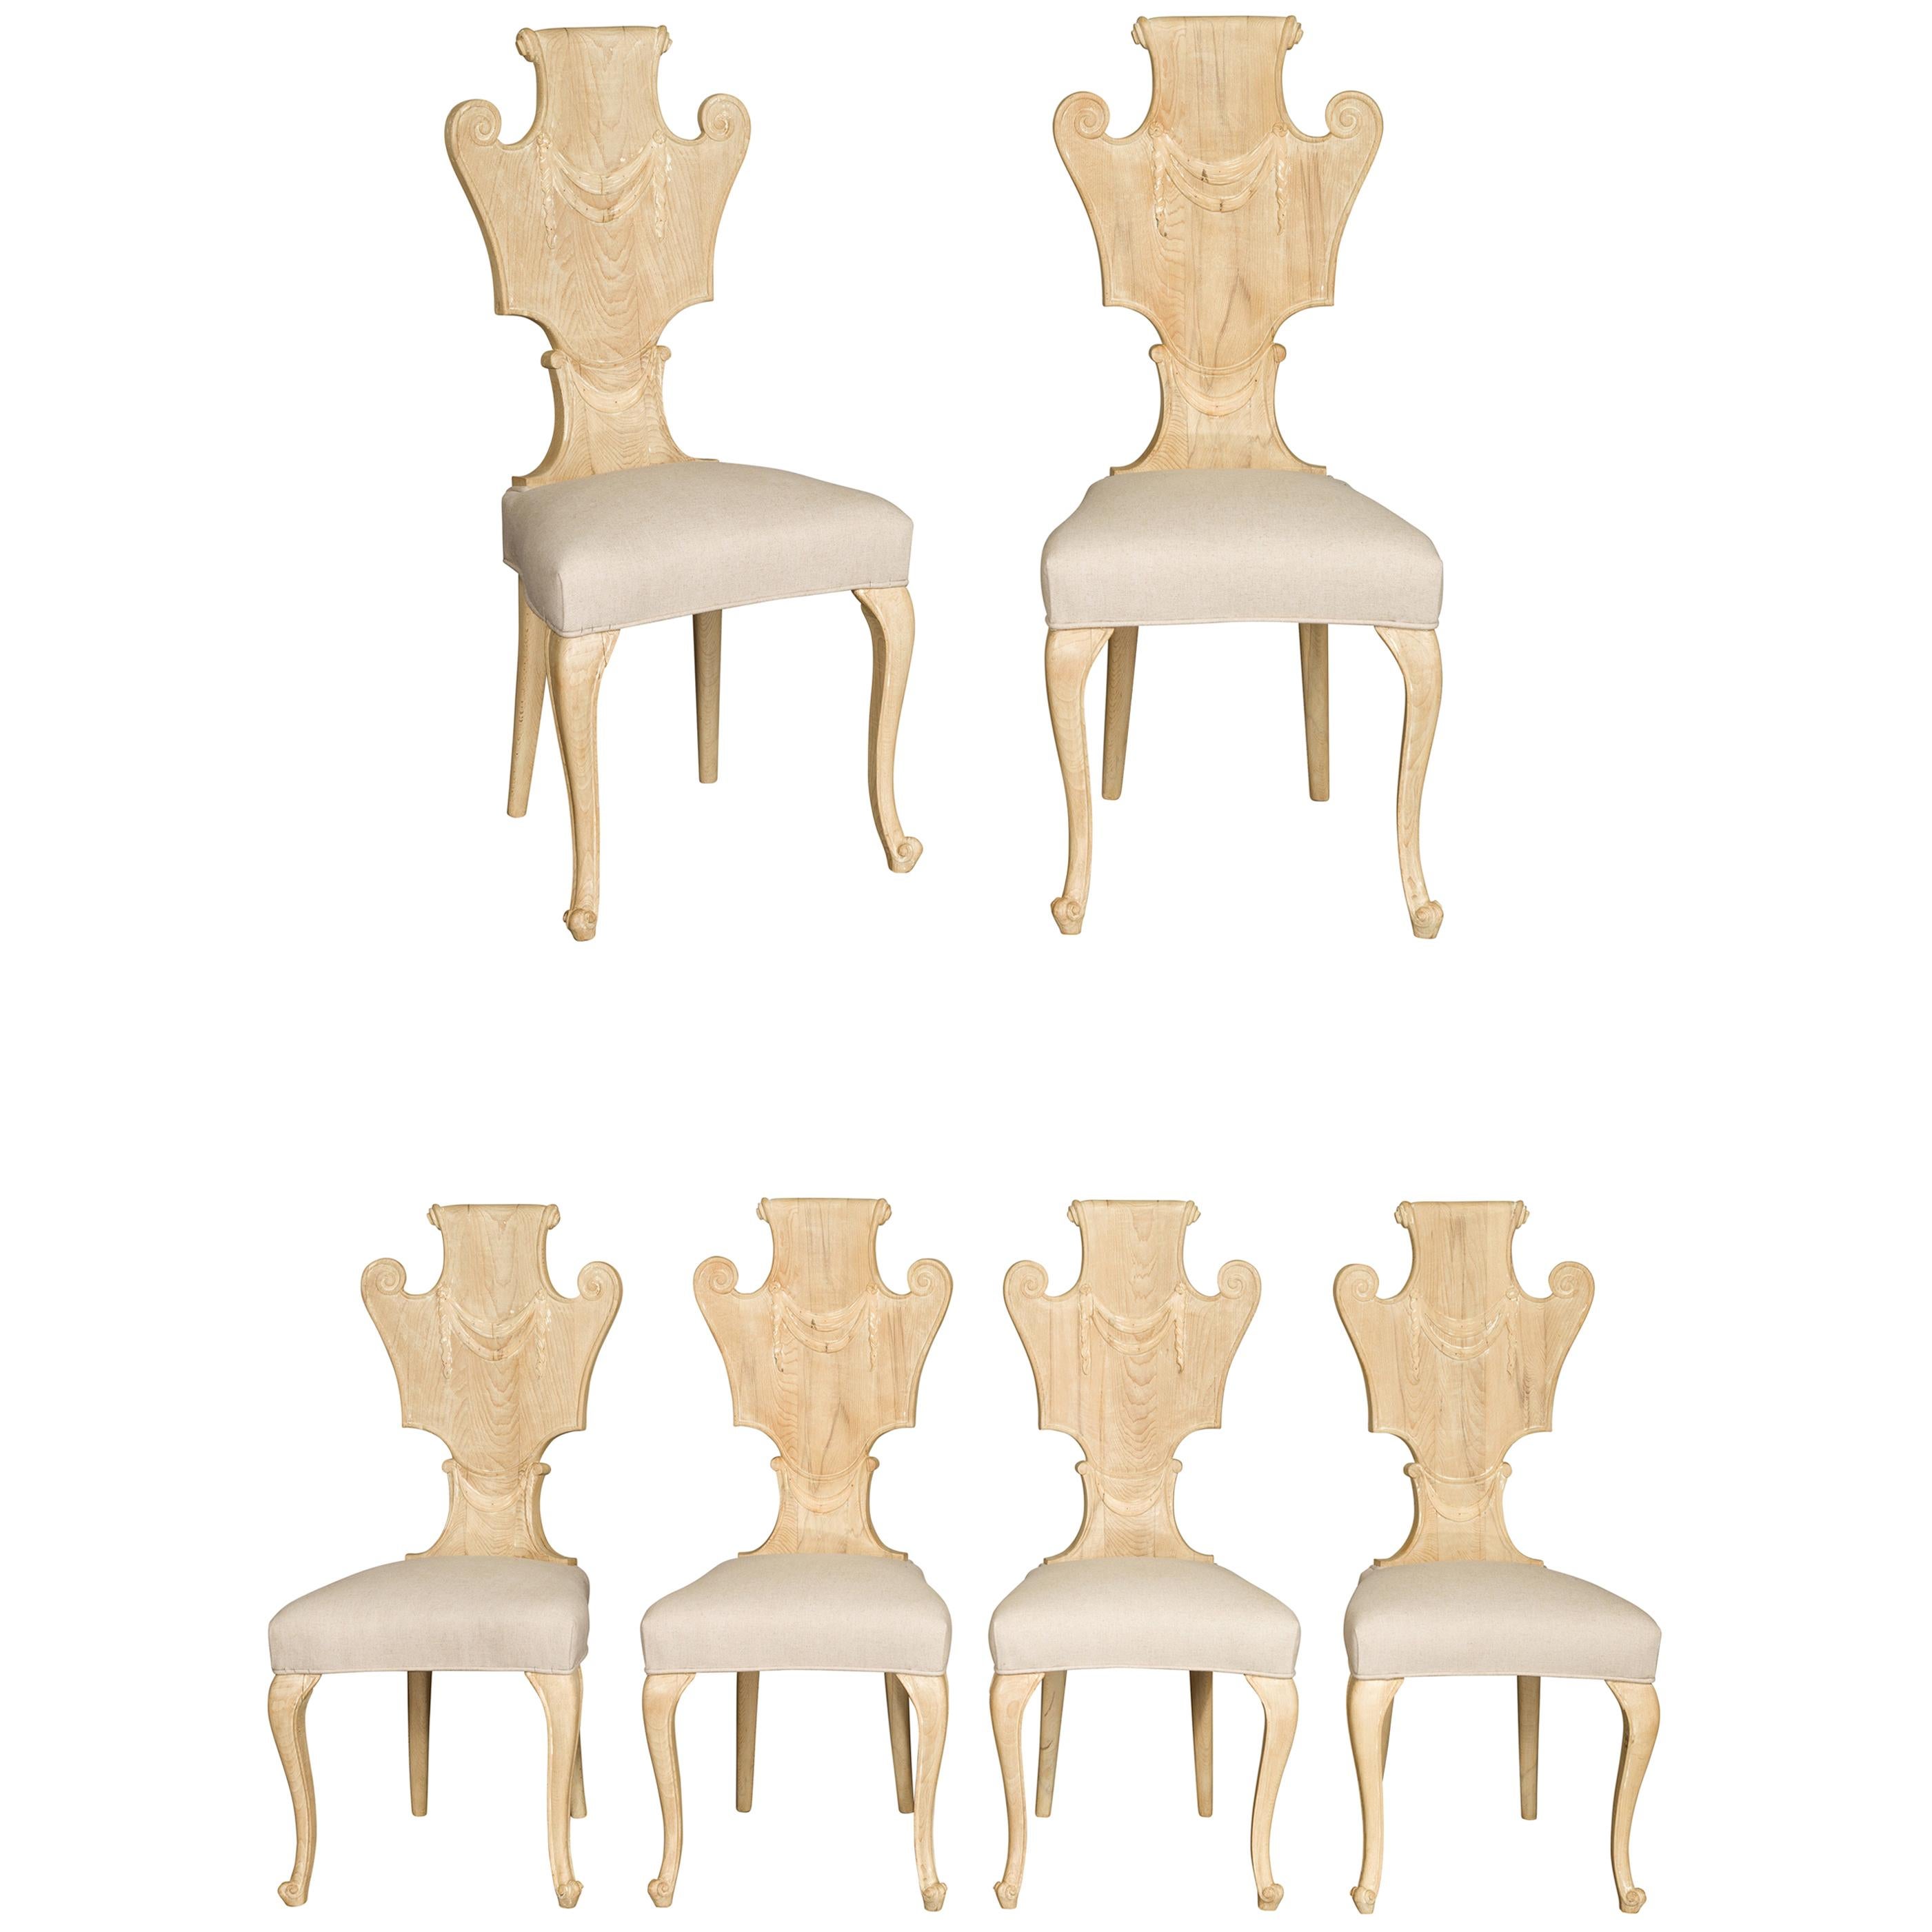 Set of Six Italian Midcentury Bleached Walnut Dining Room Chairs with Scrolls